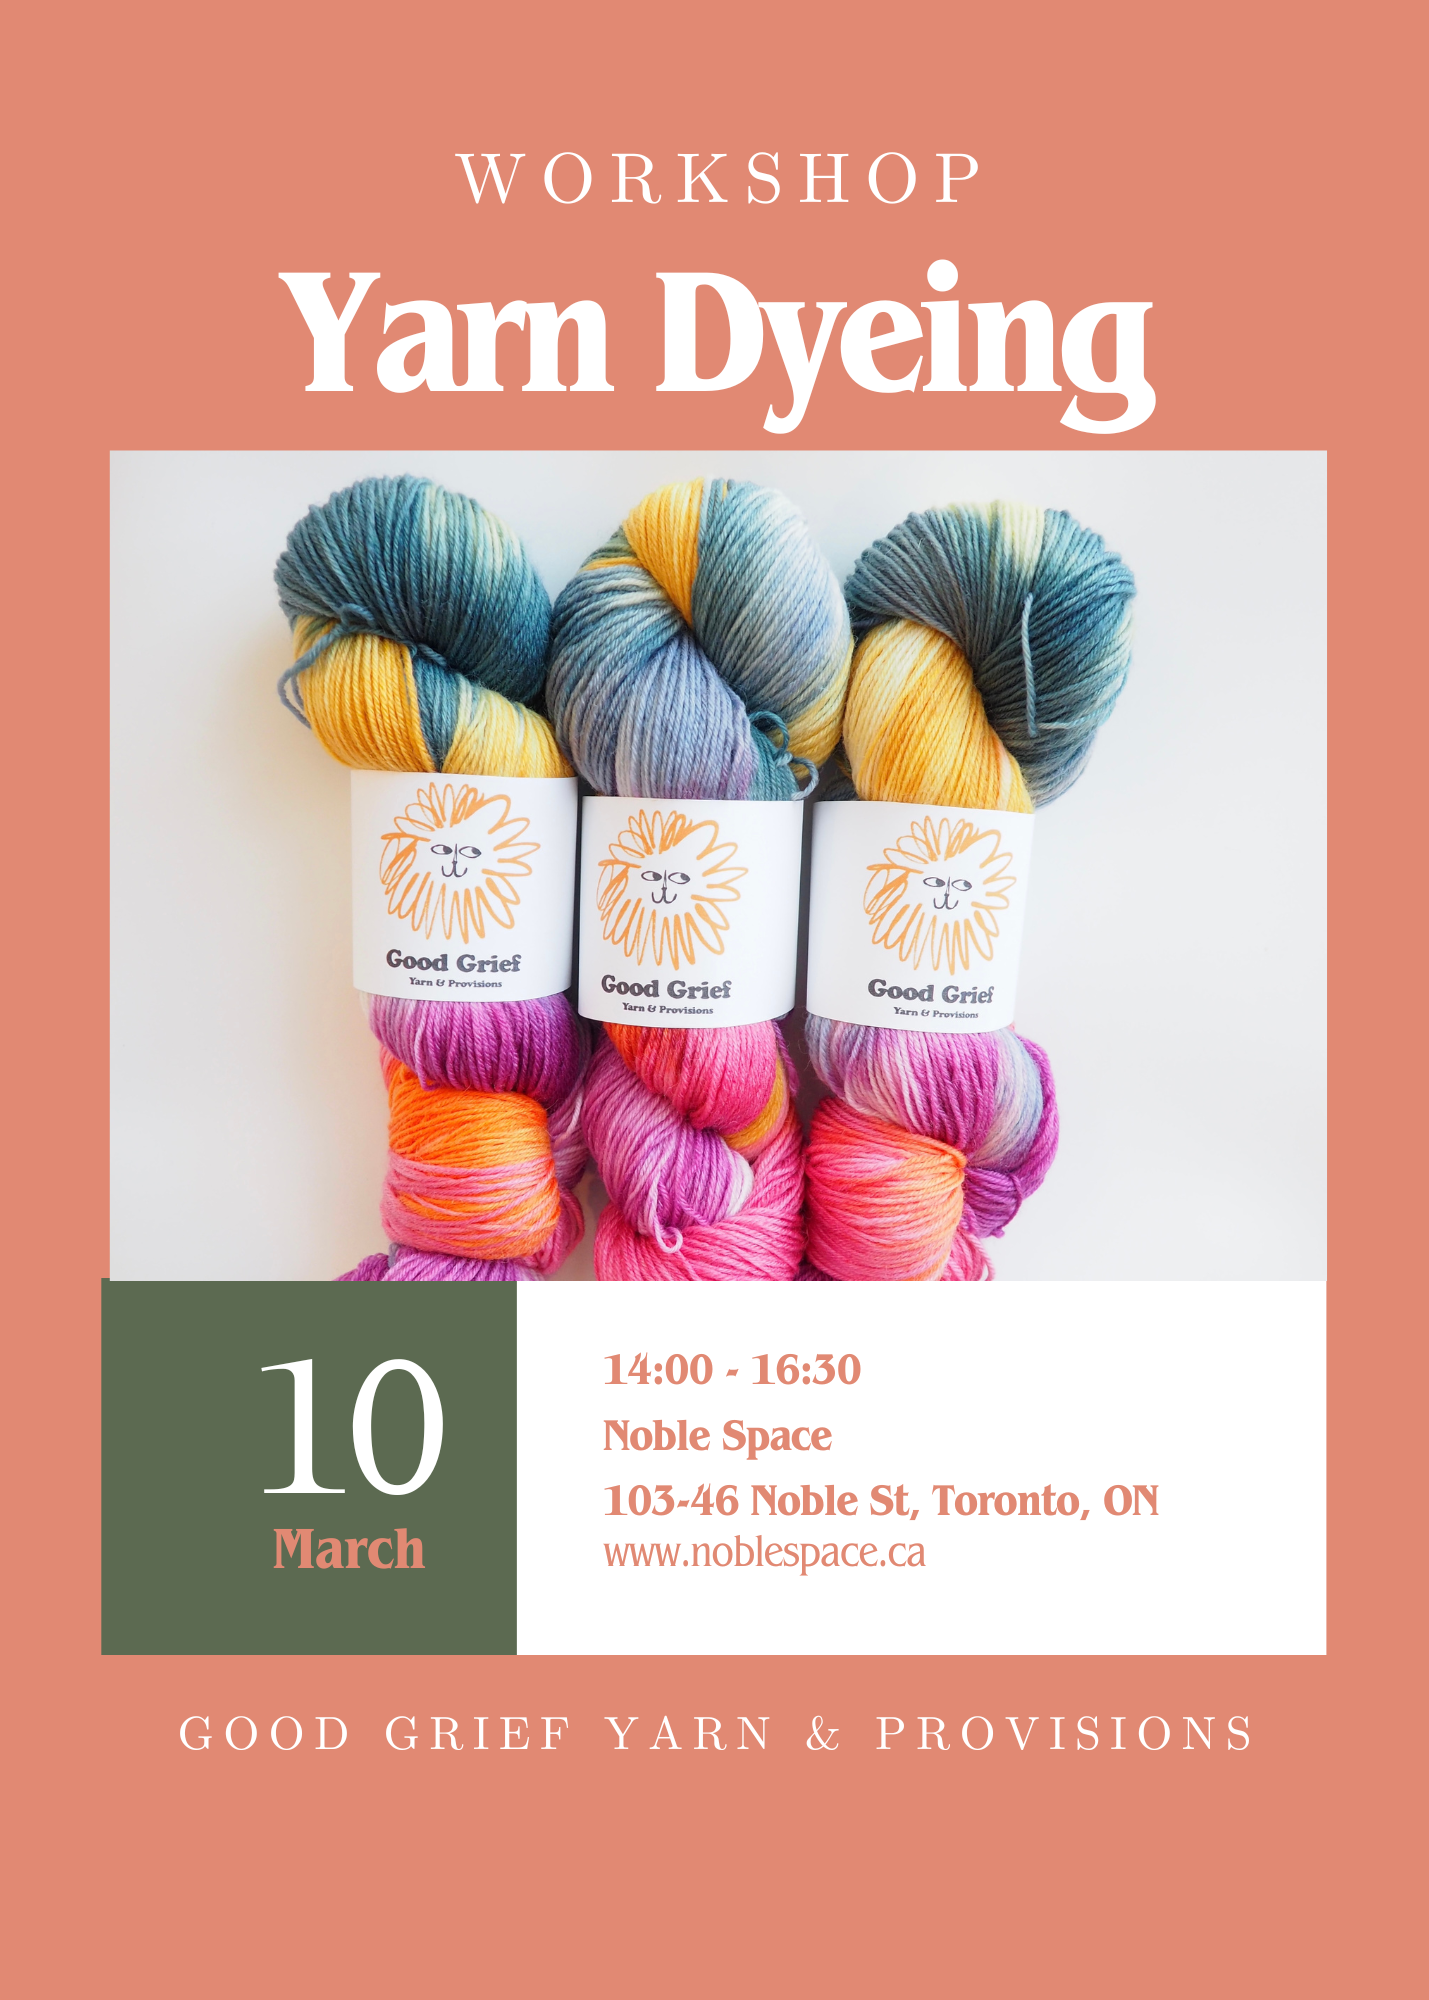 Yarn Dyeing Workshop - Sunday, March 10th from 2-4:30PM